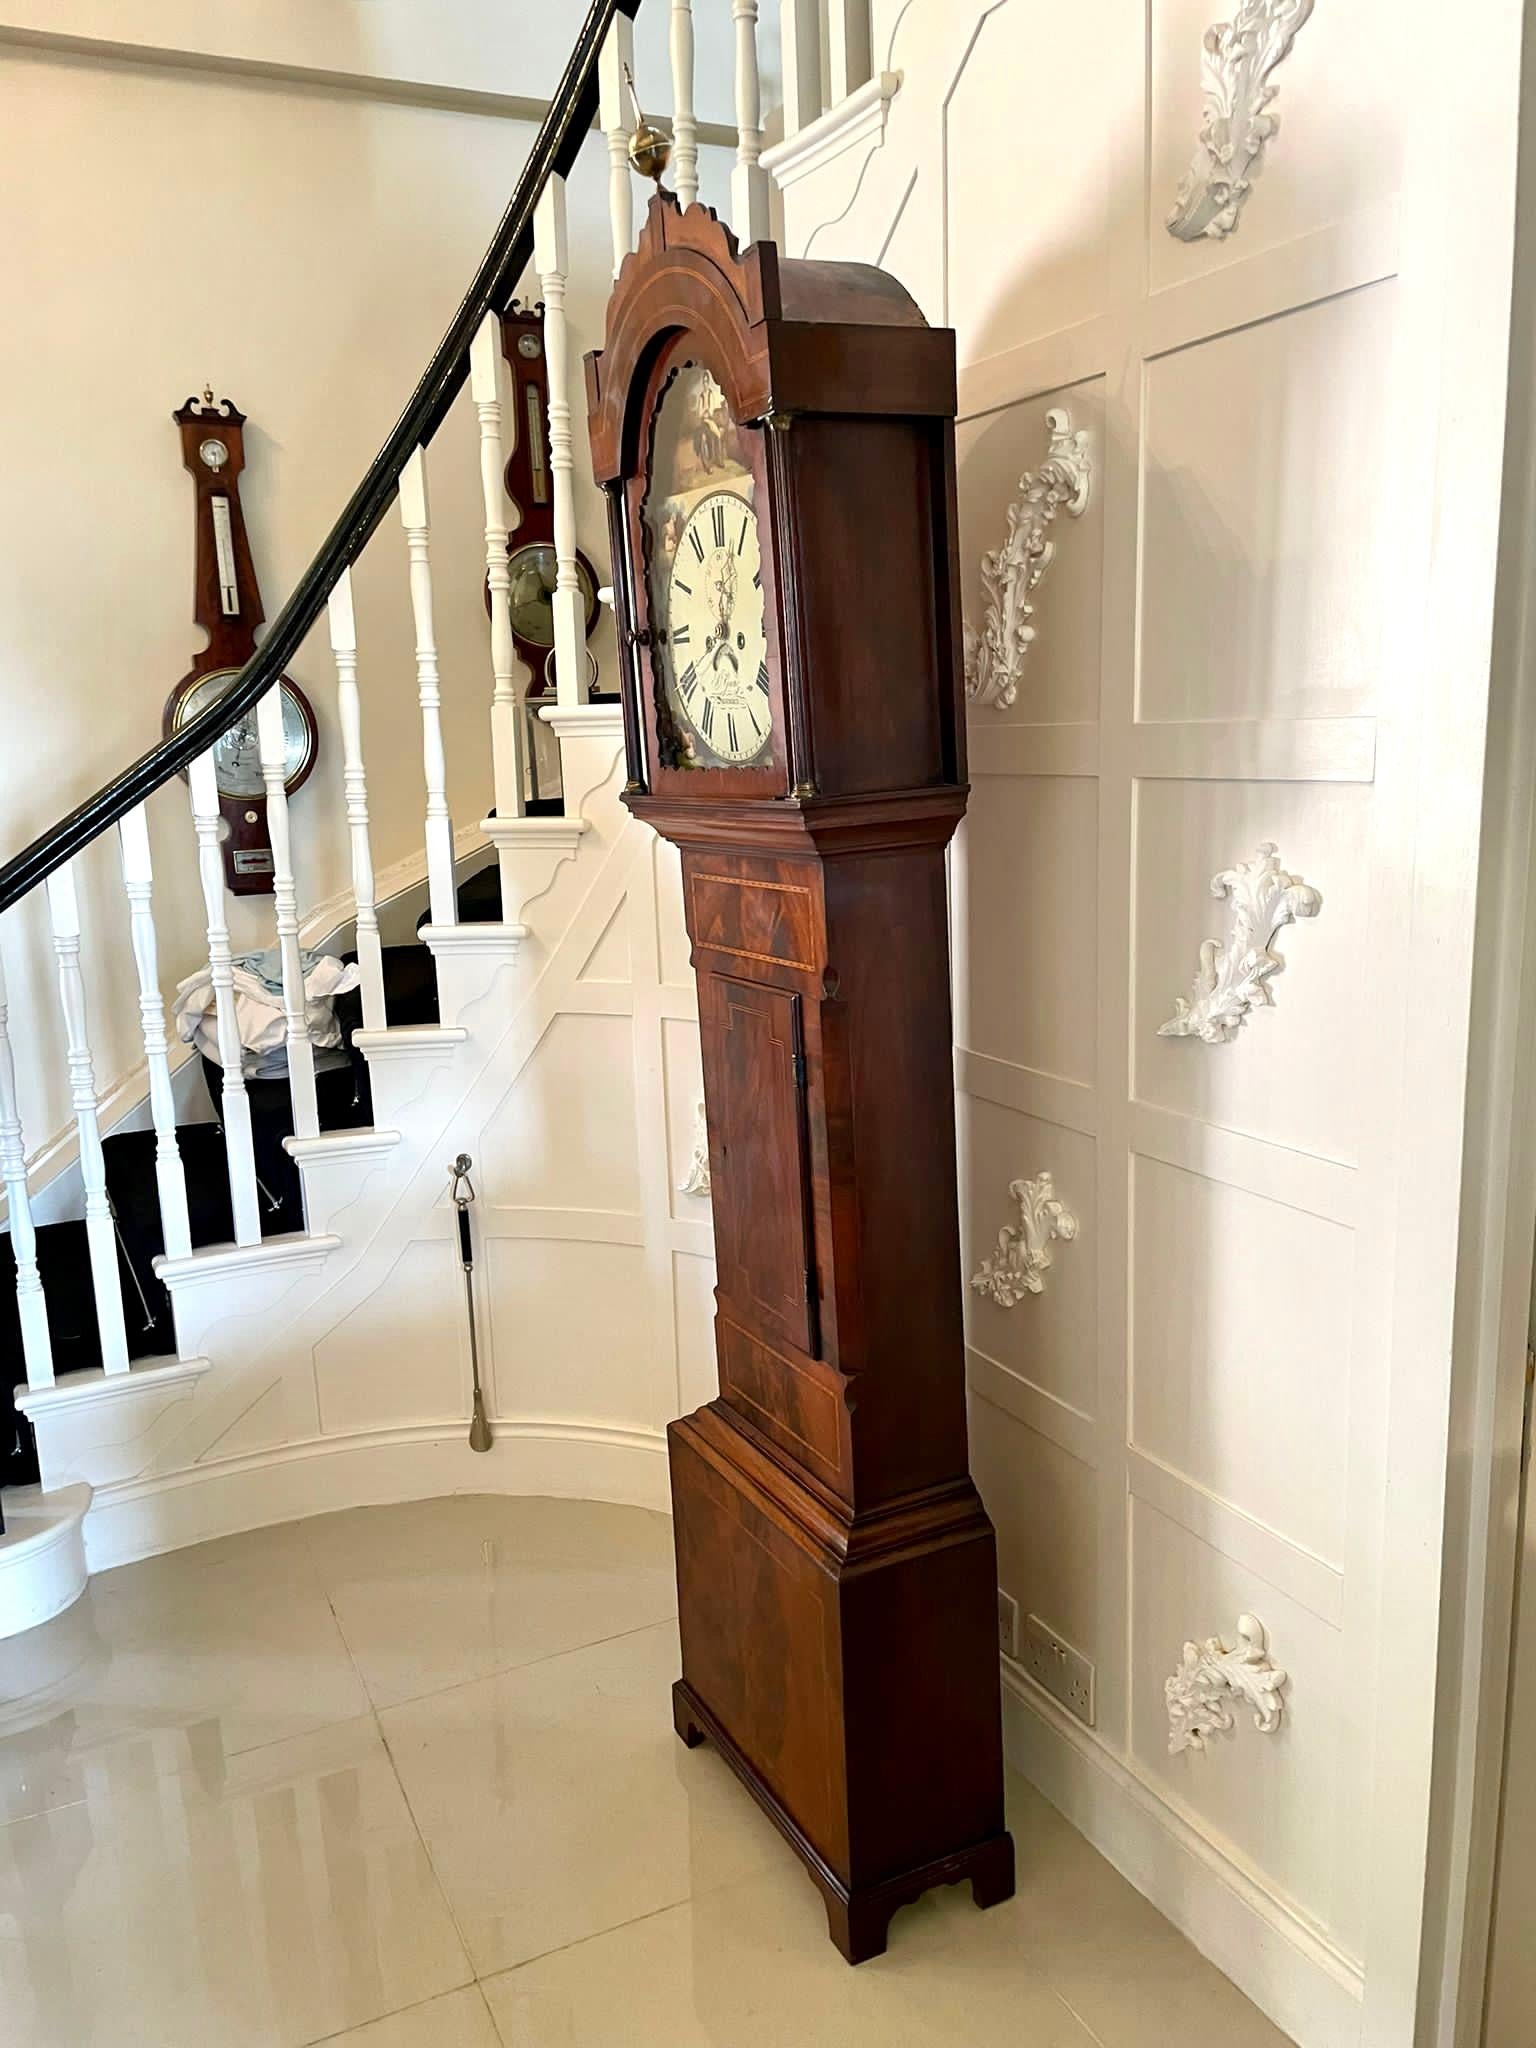 Quality 19th century antique mahogany inlaid eight day longcase clock by Ganz of Swansea having a quality mahogany case with a wavy pediment and arched glazed door flanked by reeded pilasters. It boasts a pretty painted arched dial depicting a young